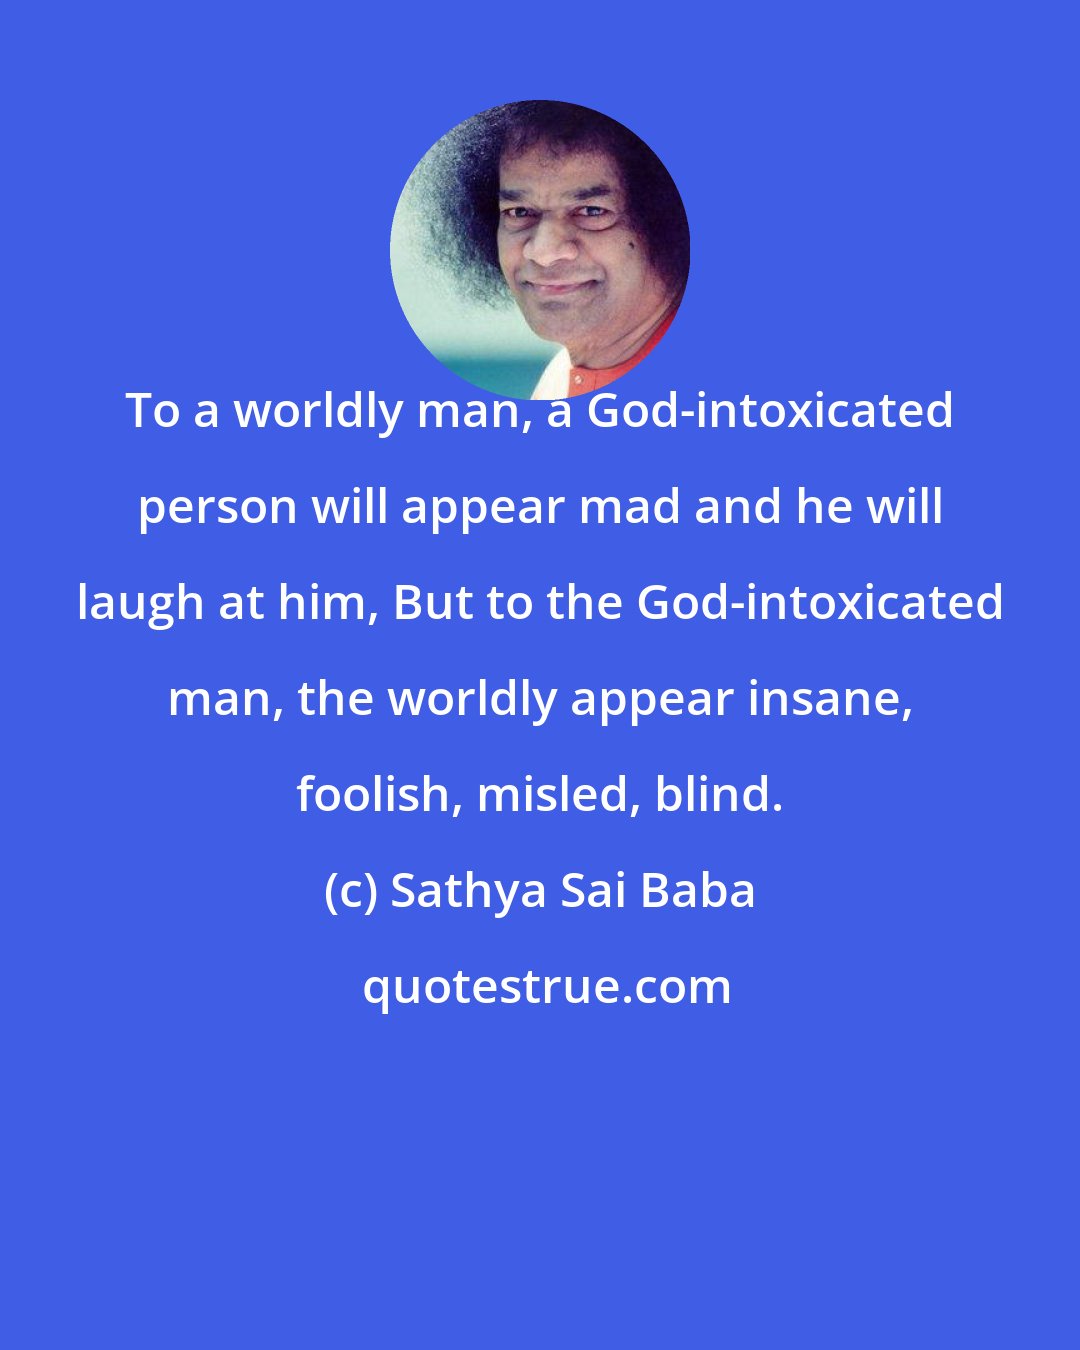 Sathya Sai Baba: To a worldly man, a God-intoxicated person will appear mad and he will laugh at him, But to the God-intoxicated man, the worldly appear insane, foolish, misled, blind.